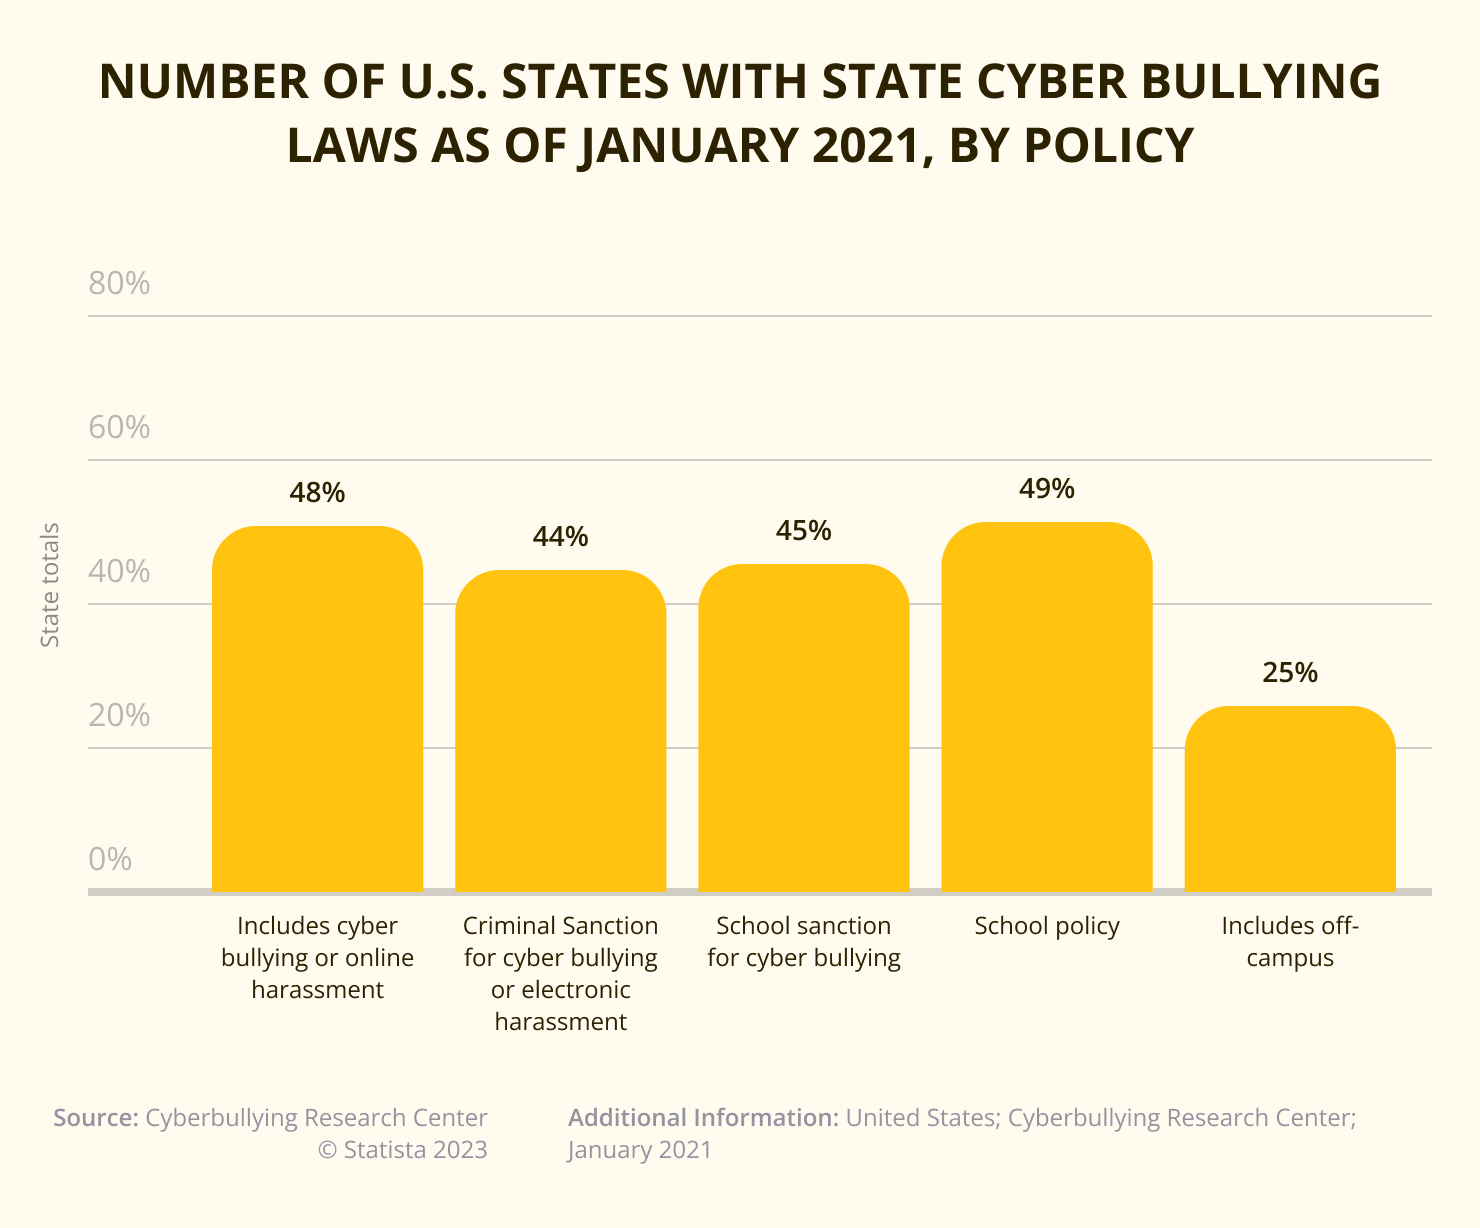 U.S. States With State Cyber Bullying Laws 